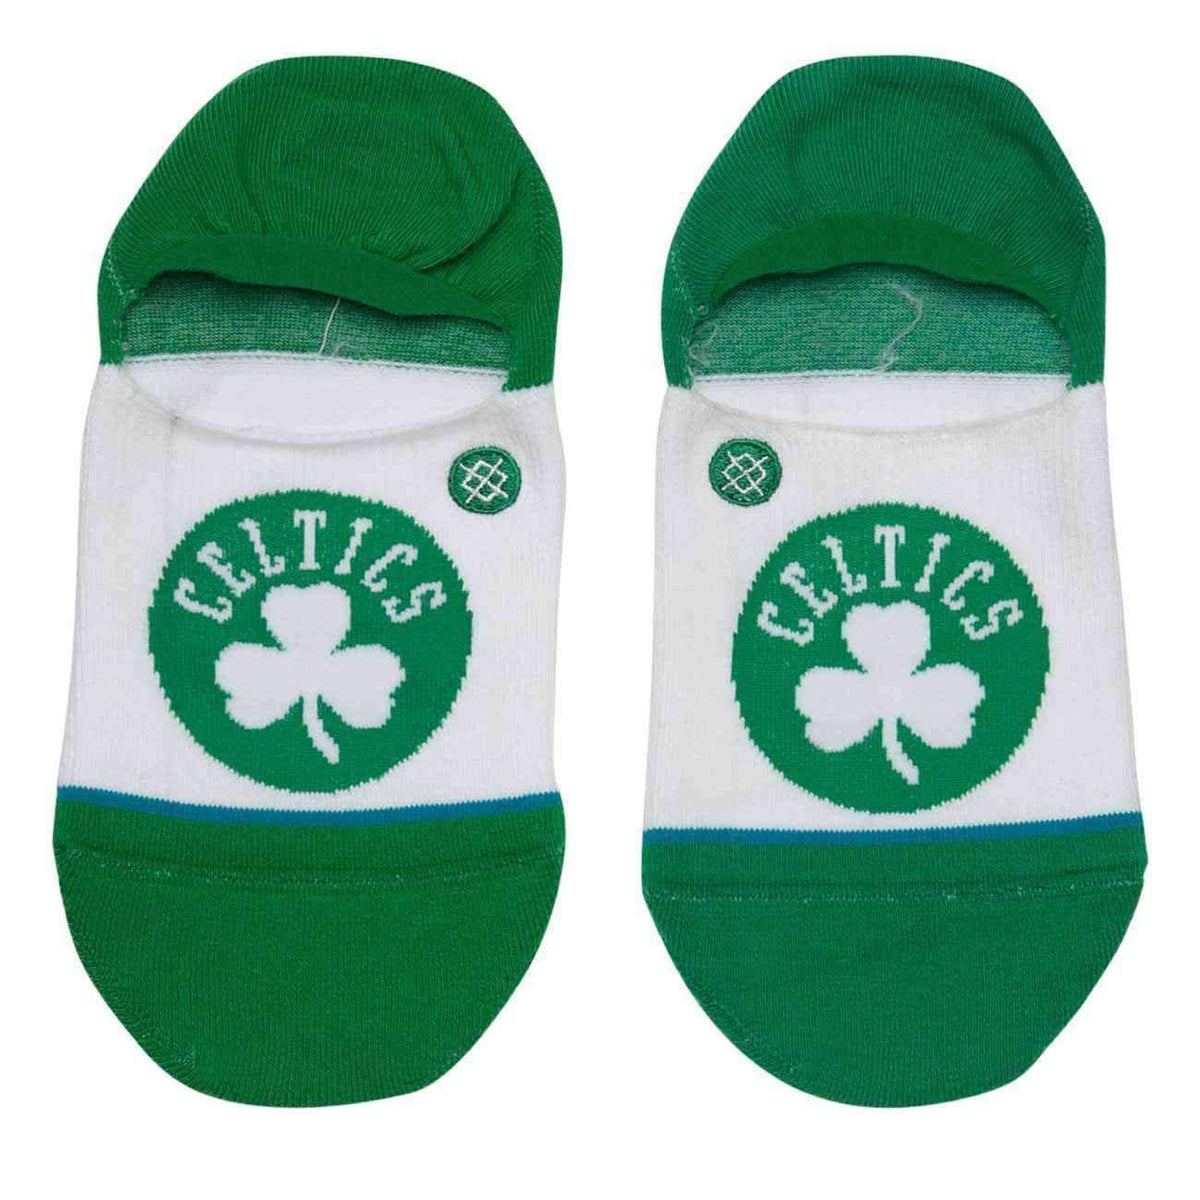 Stance NBA Arena Celtics Invisible Low Socks in Green Mens Low/Ankle Socks by Stance